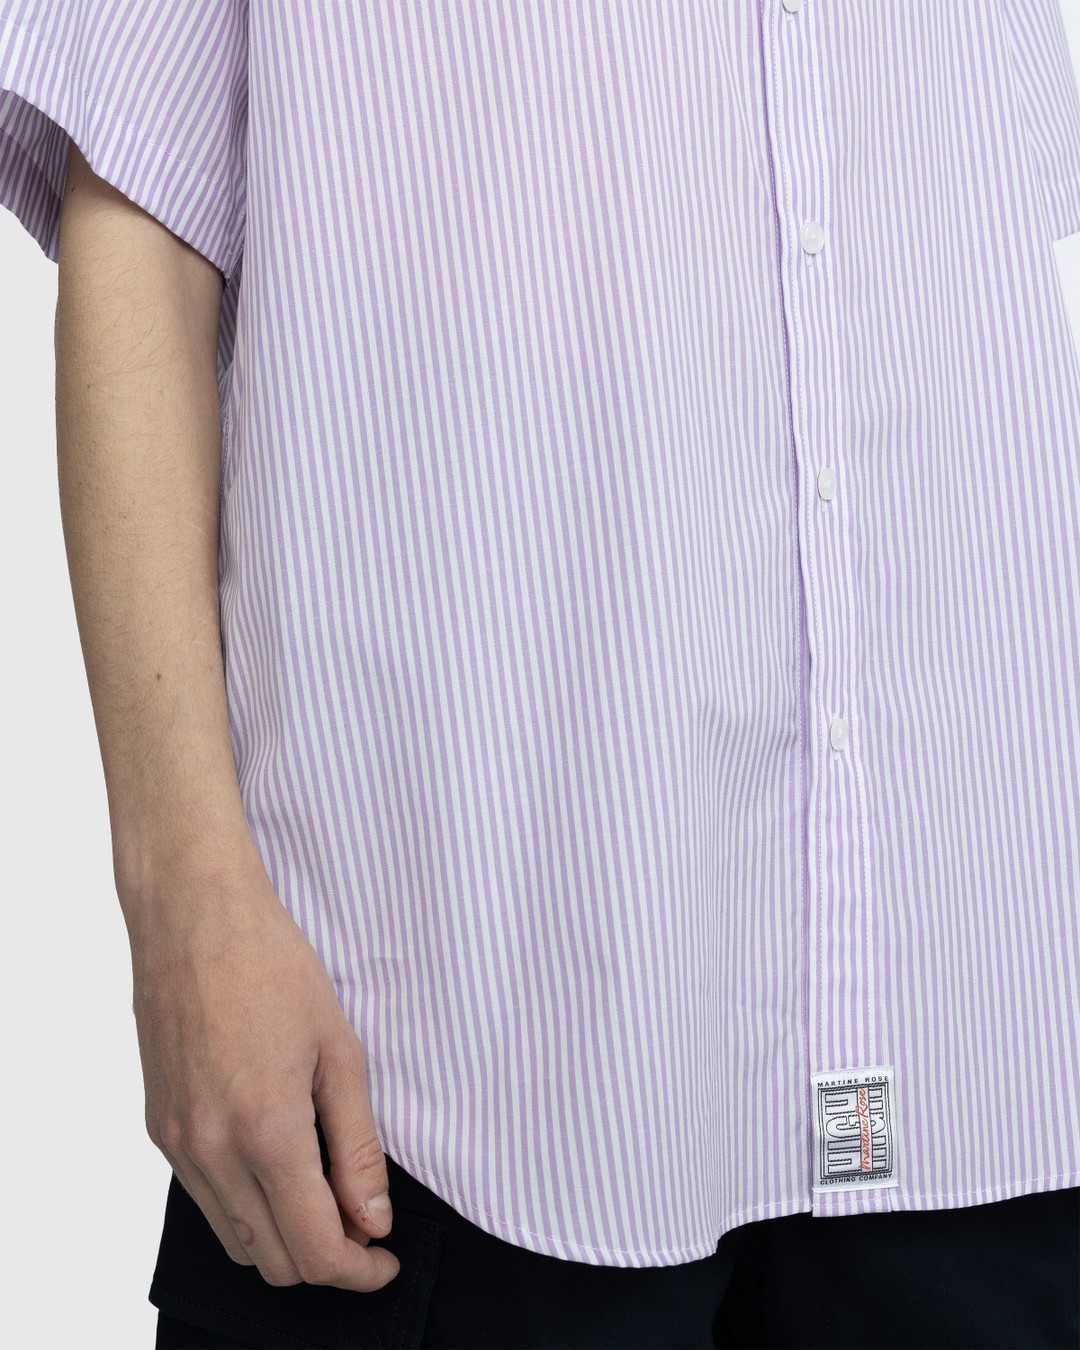 Martine Rose – Classic Short-Sleeve Button-Down Shirt Lilac and White  Stripe